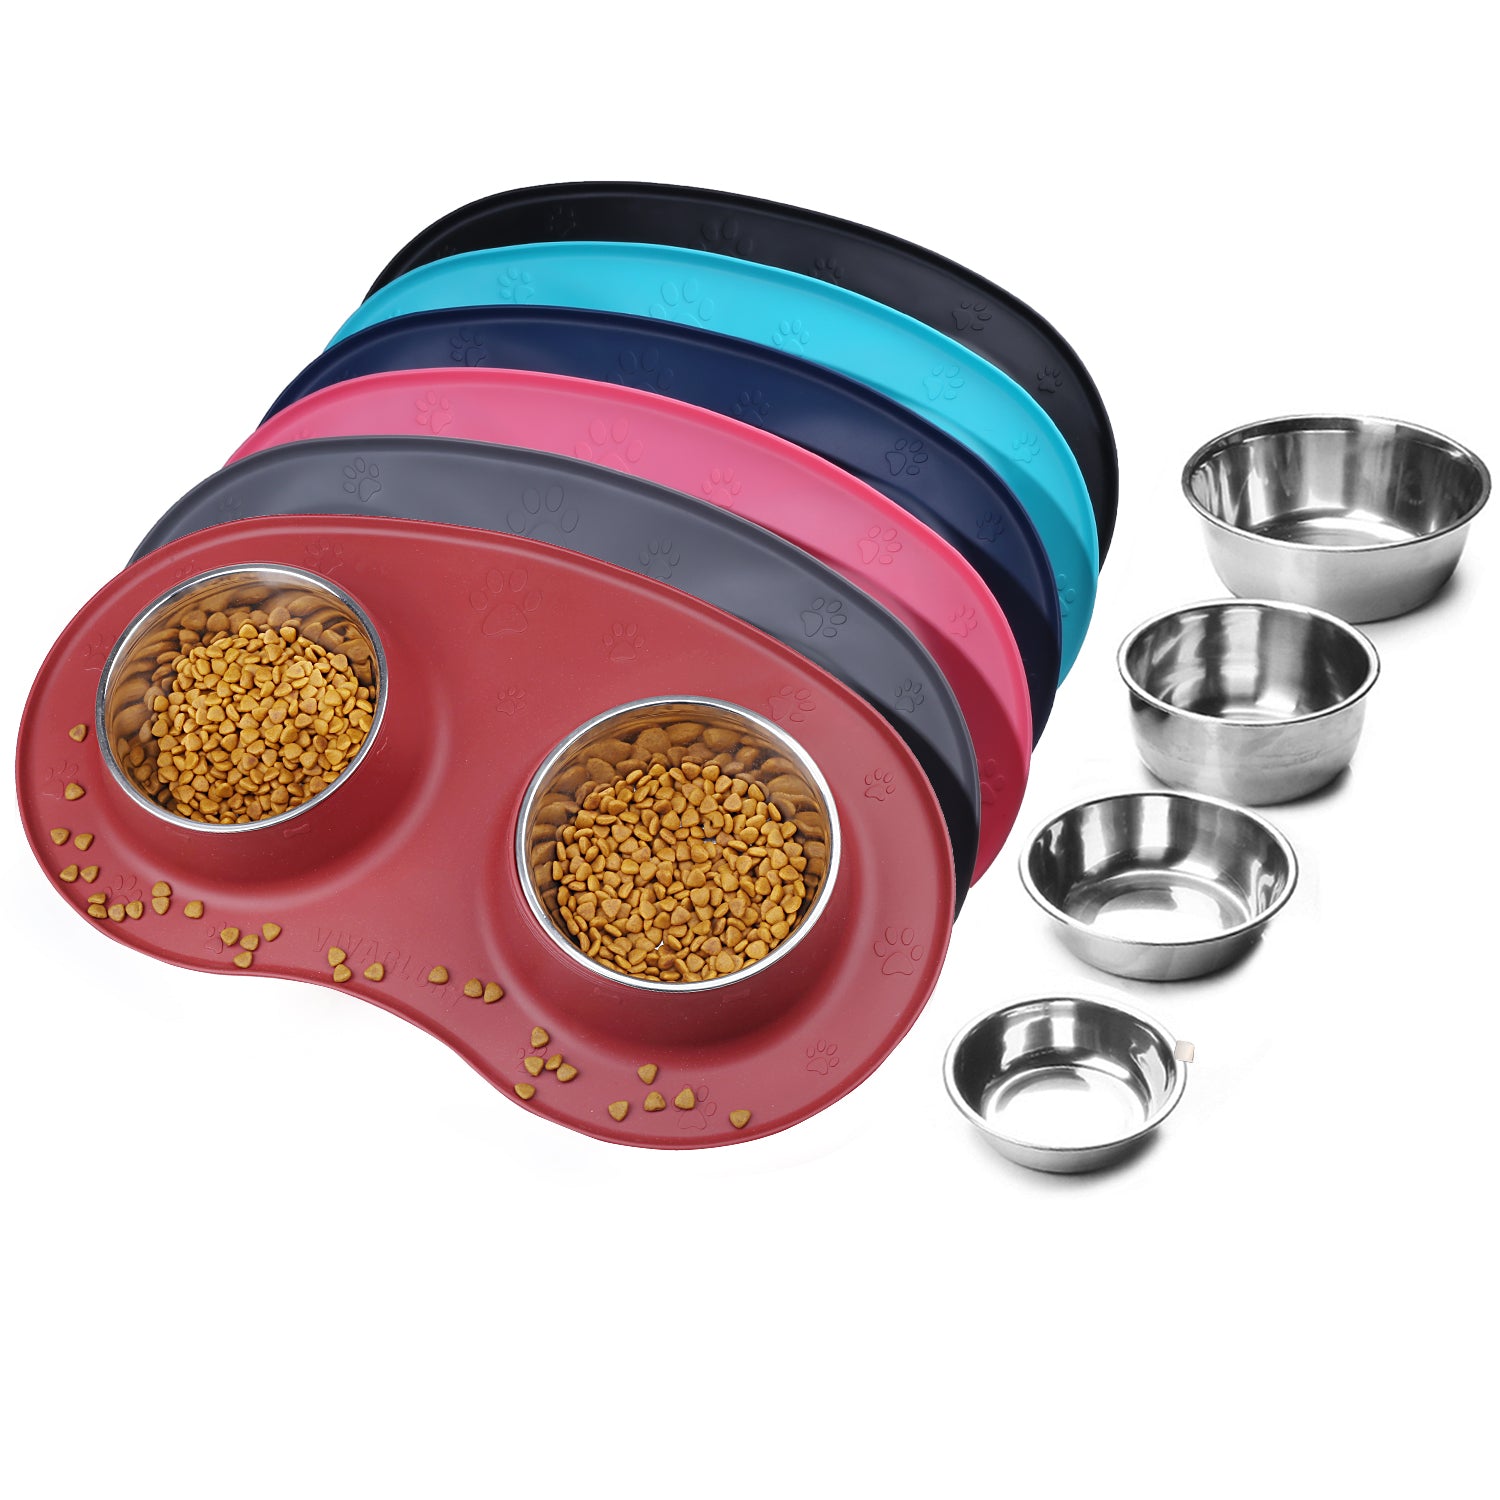 Stainless Steel Dog Bowl & Silicone Mat Set